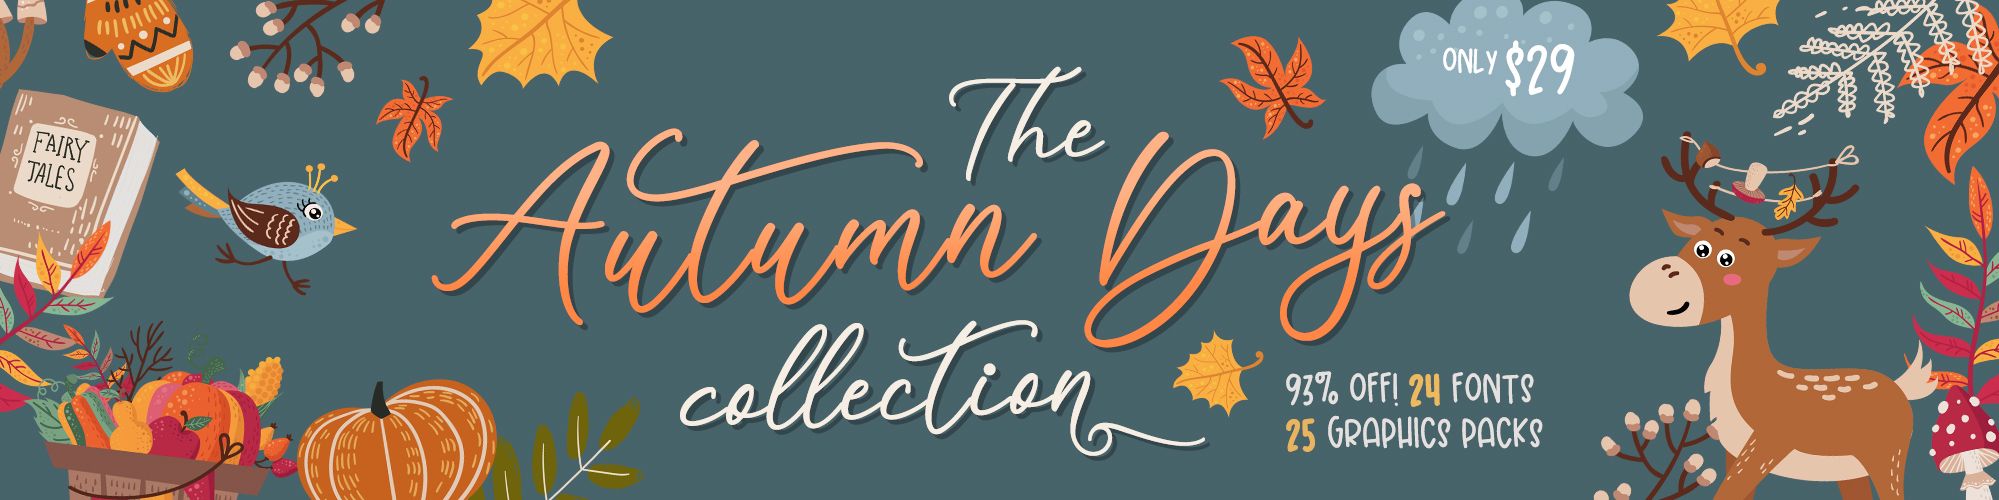 Get 93% OFF on our Autumn Days Collection NOW!